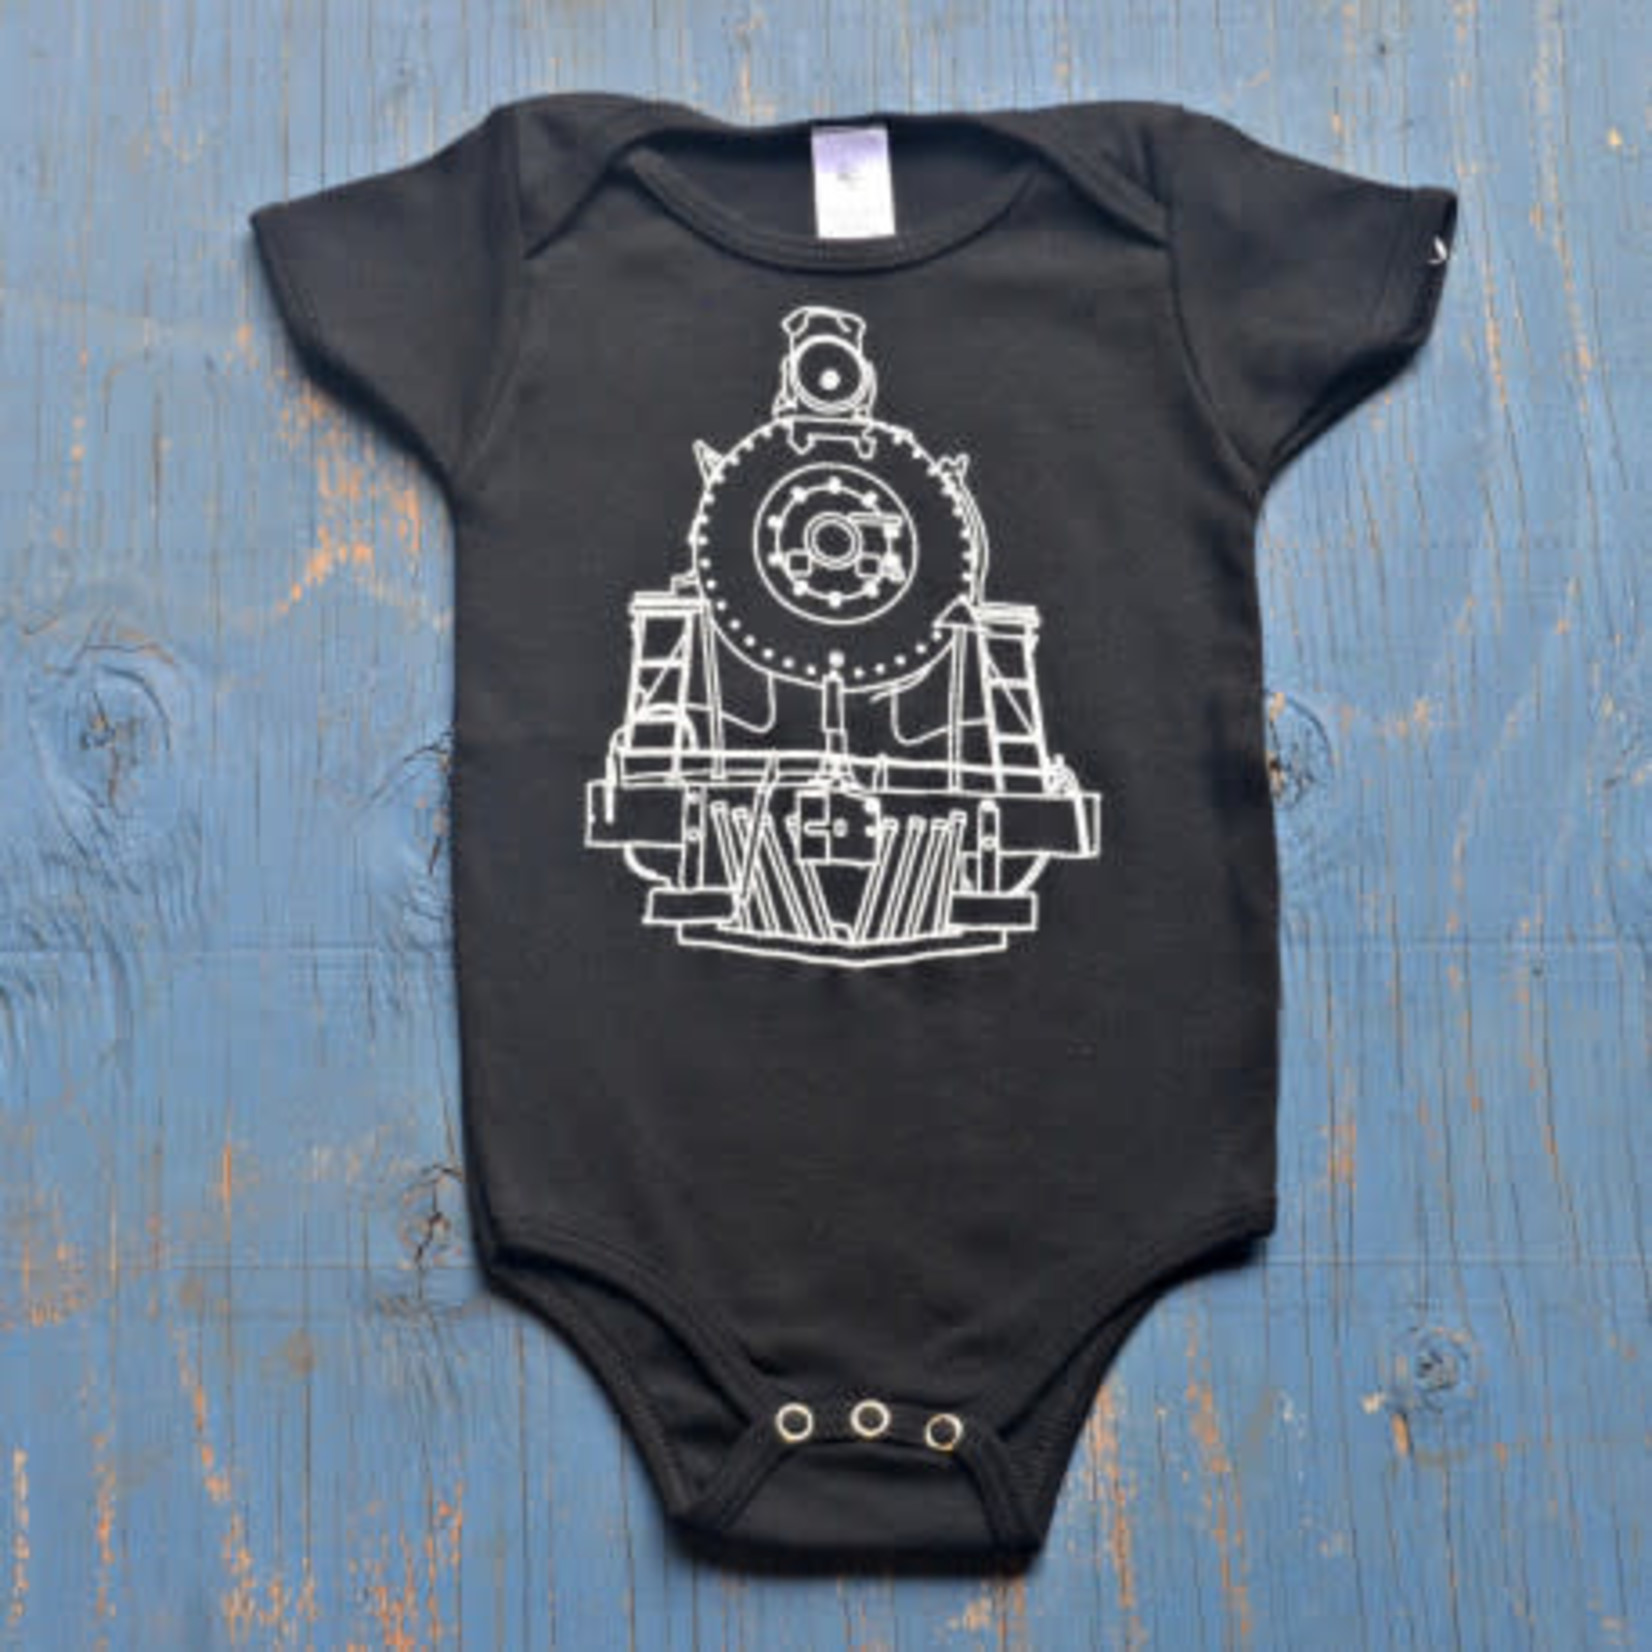 Science and Technology Baby Onesie Big Train